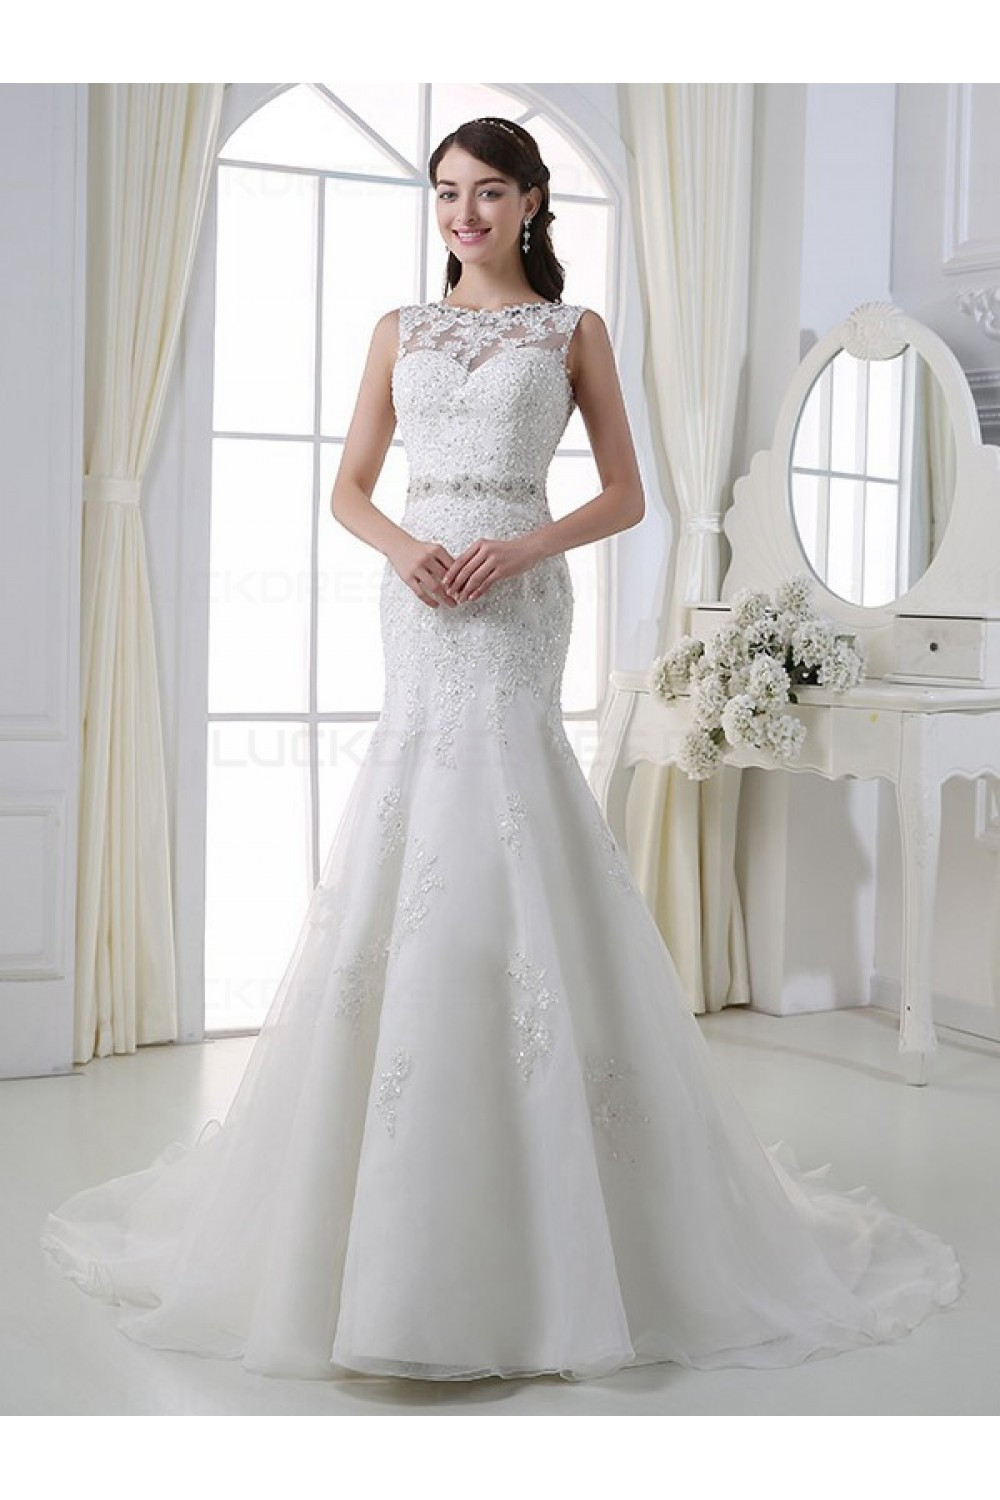 Wedding Gowns Lace
 Mermaid Sleeveless Lace Wedding Dresses Bridal Gowns